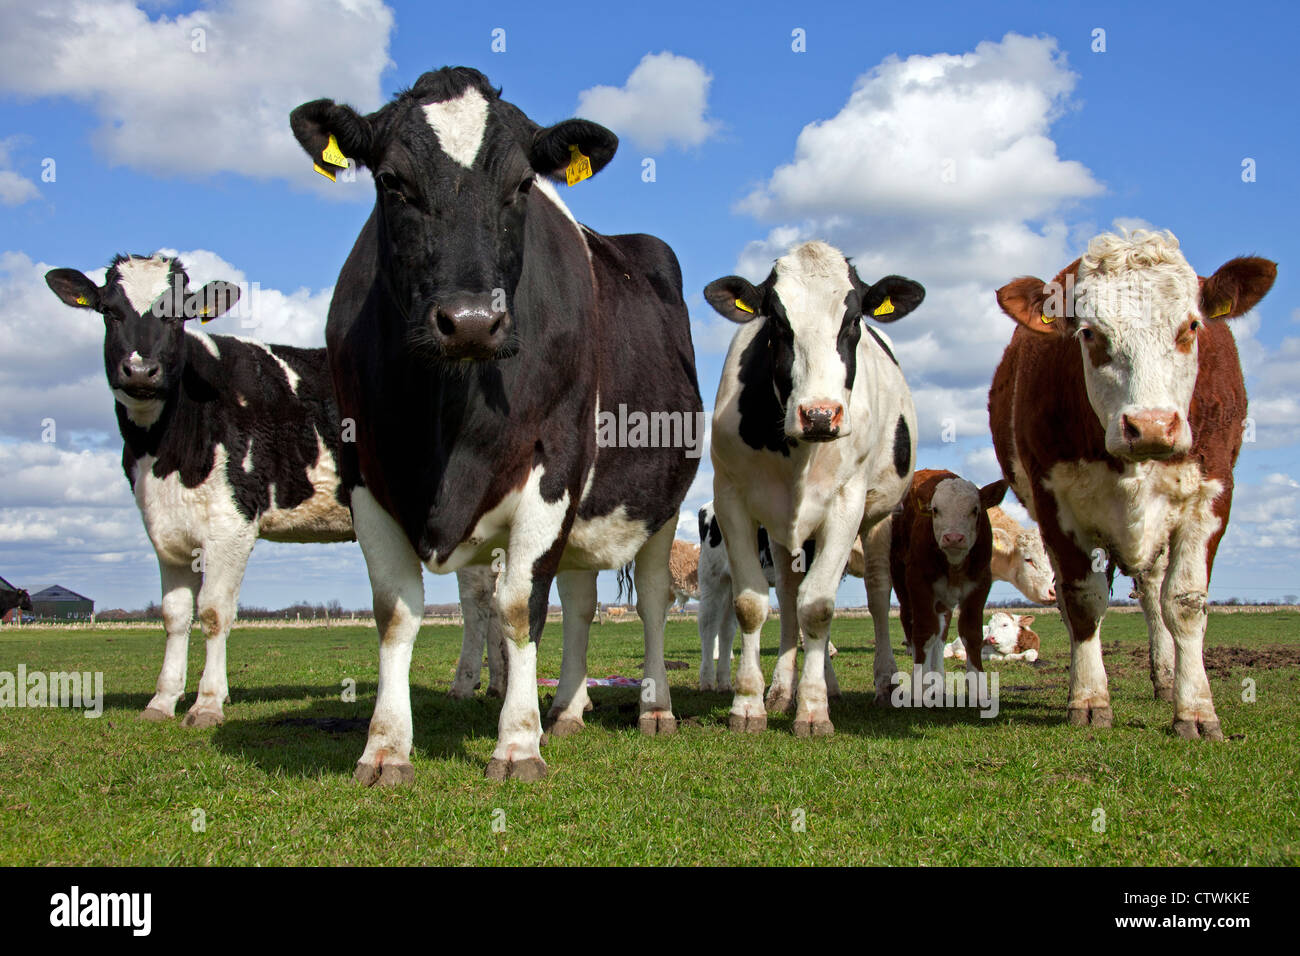 Herd of black and white cows (Bos taurus) marked with yellow ear tags in both ears in field, Germany Stock Photo